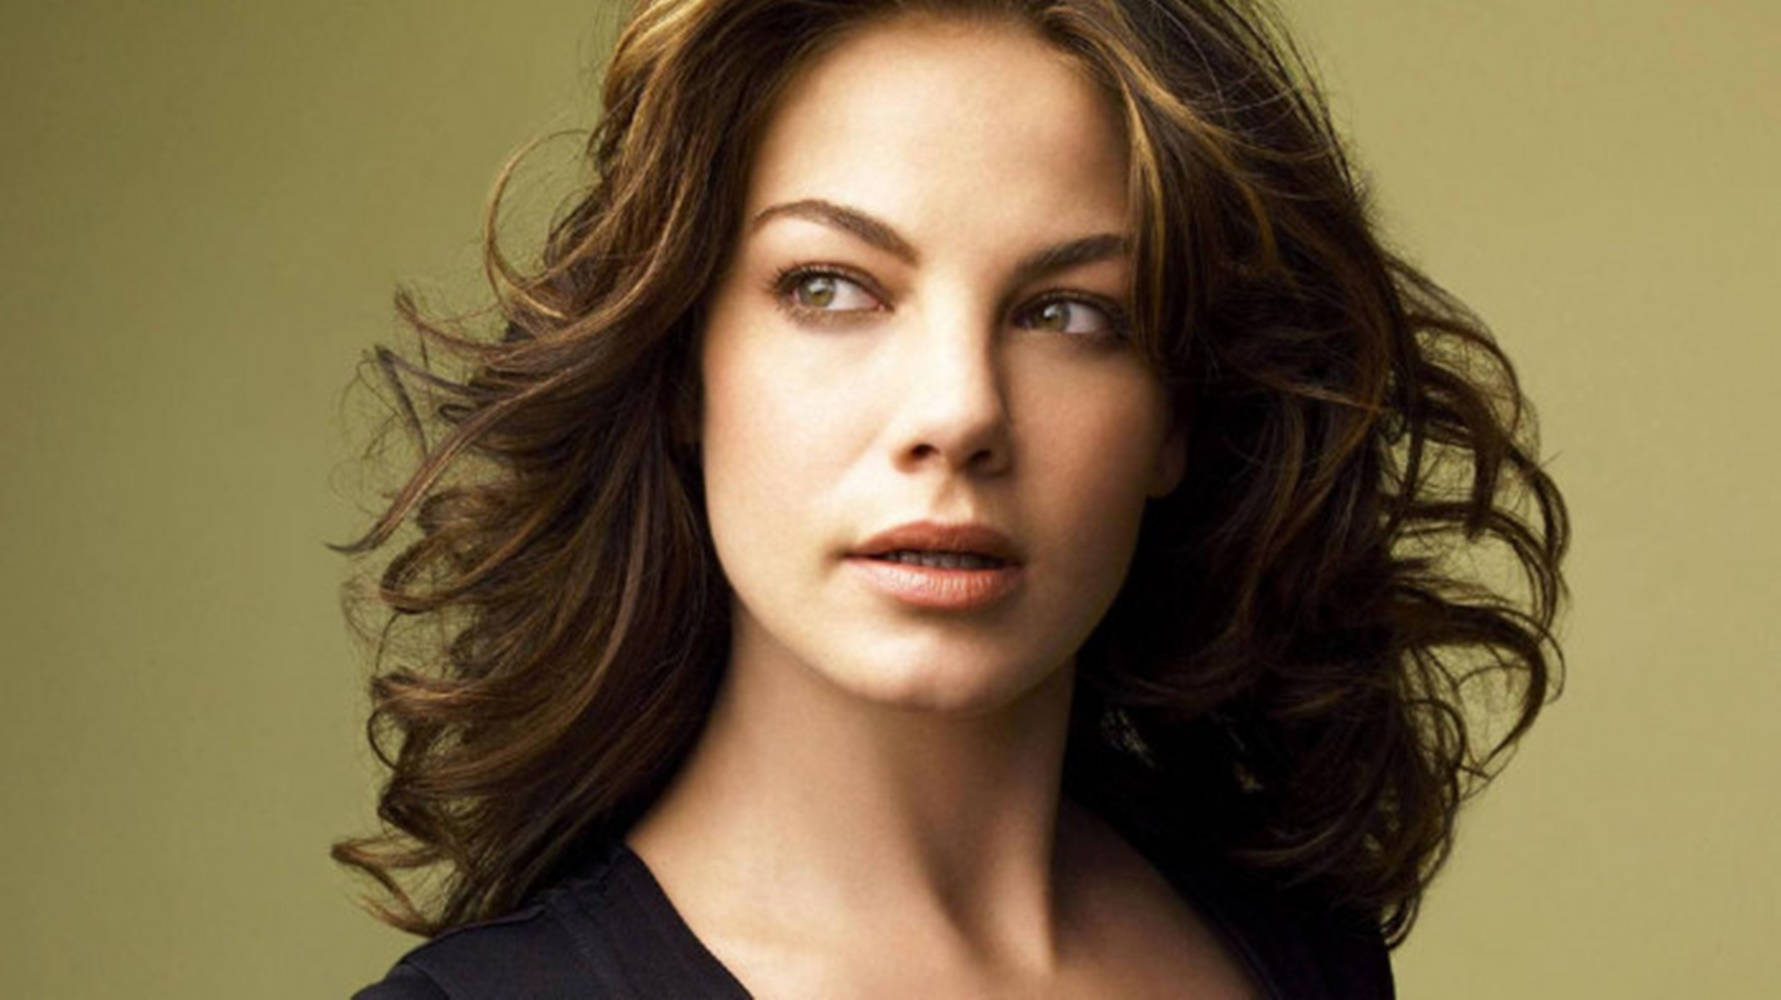 Michelle Monaghan Natural Beauty Wallpaper